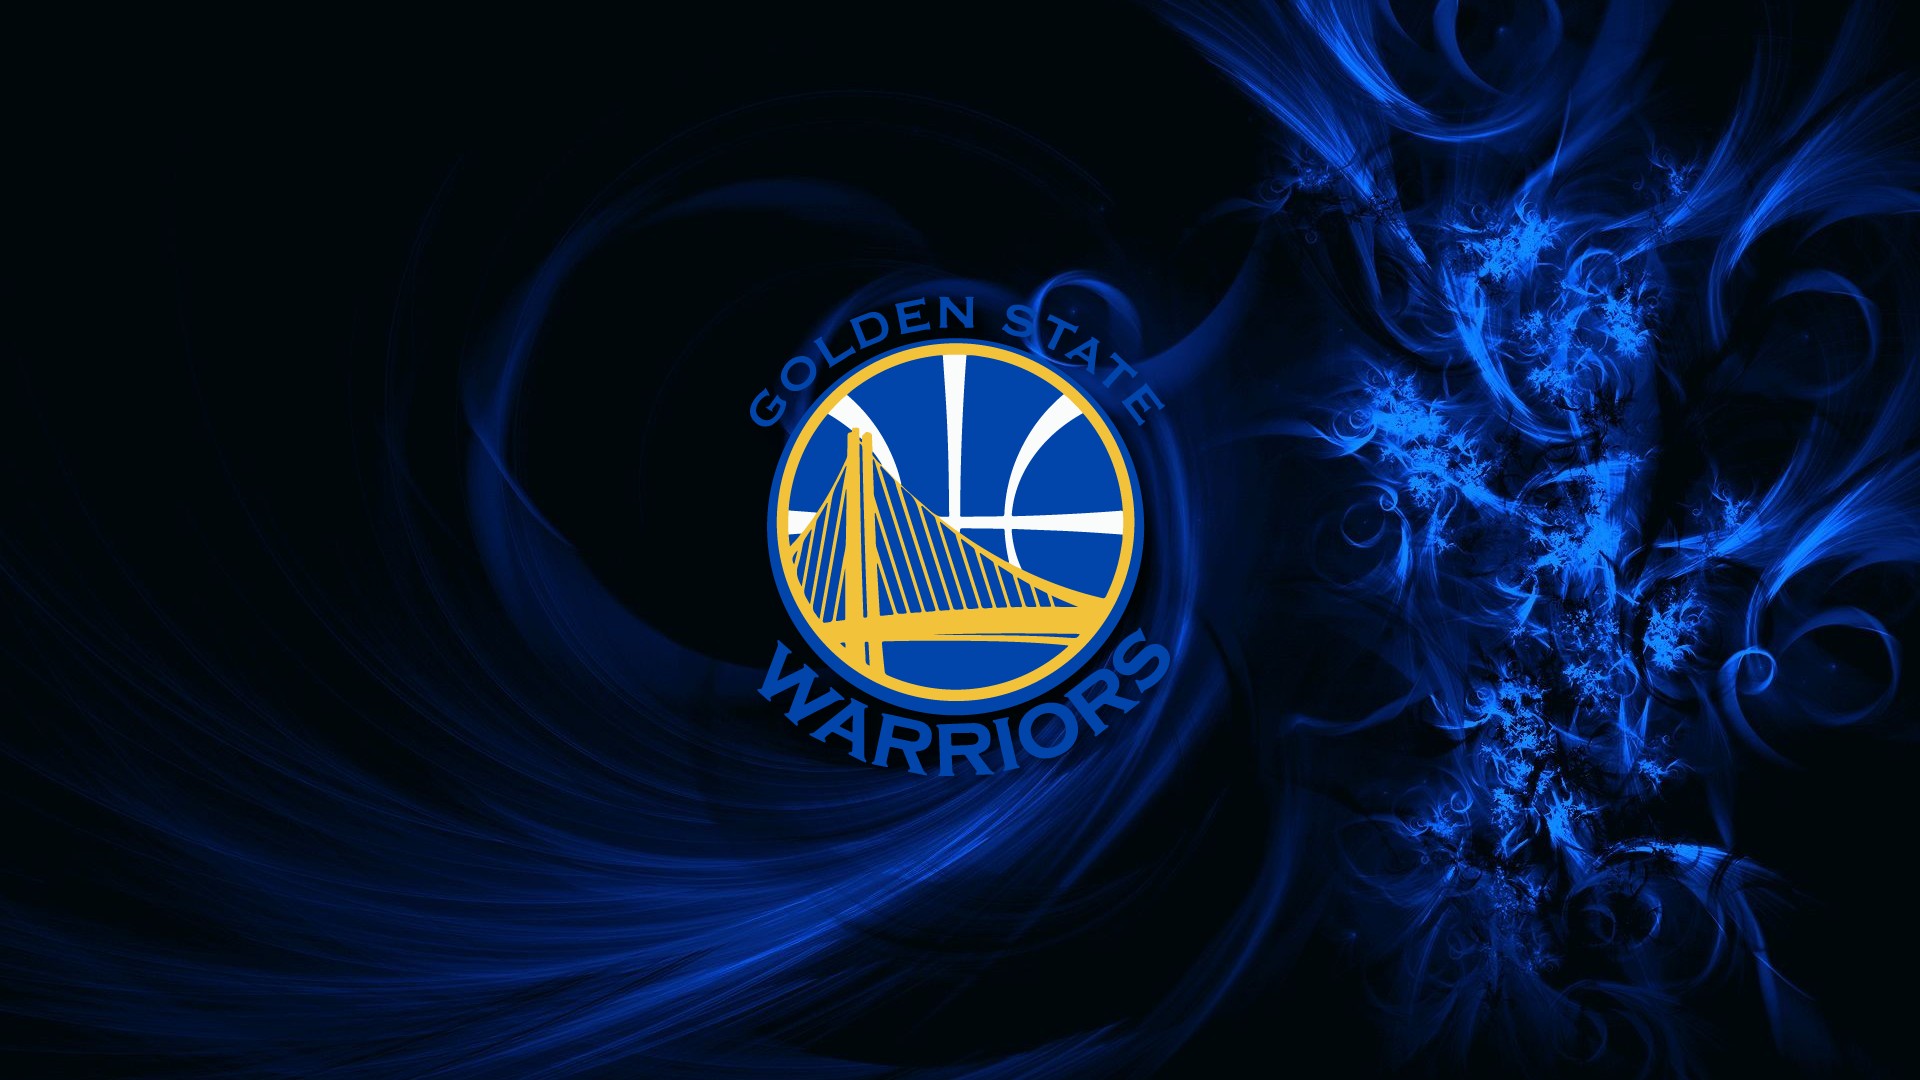 Wallpaper Golden State Warriors HD with image resolution 1920x1080 pixel. You can make this wallpaper for your Desktop Computer Backgrounds, Mac Wallpapers, Android Lock screen or iPhone Screensavers